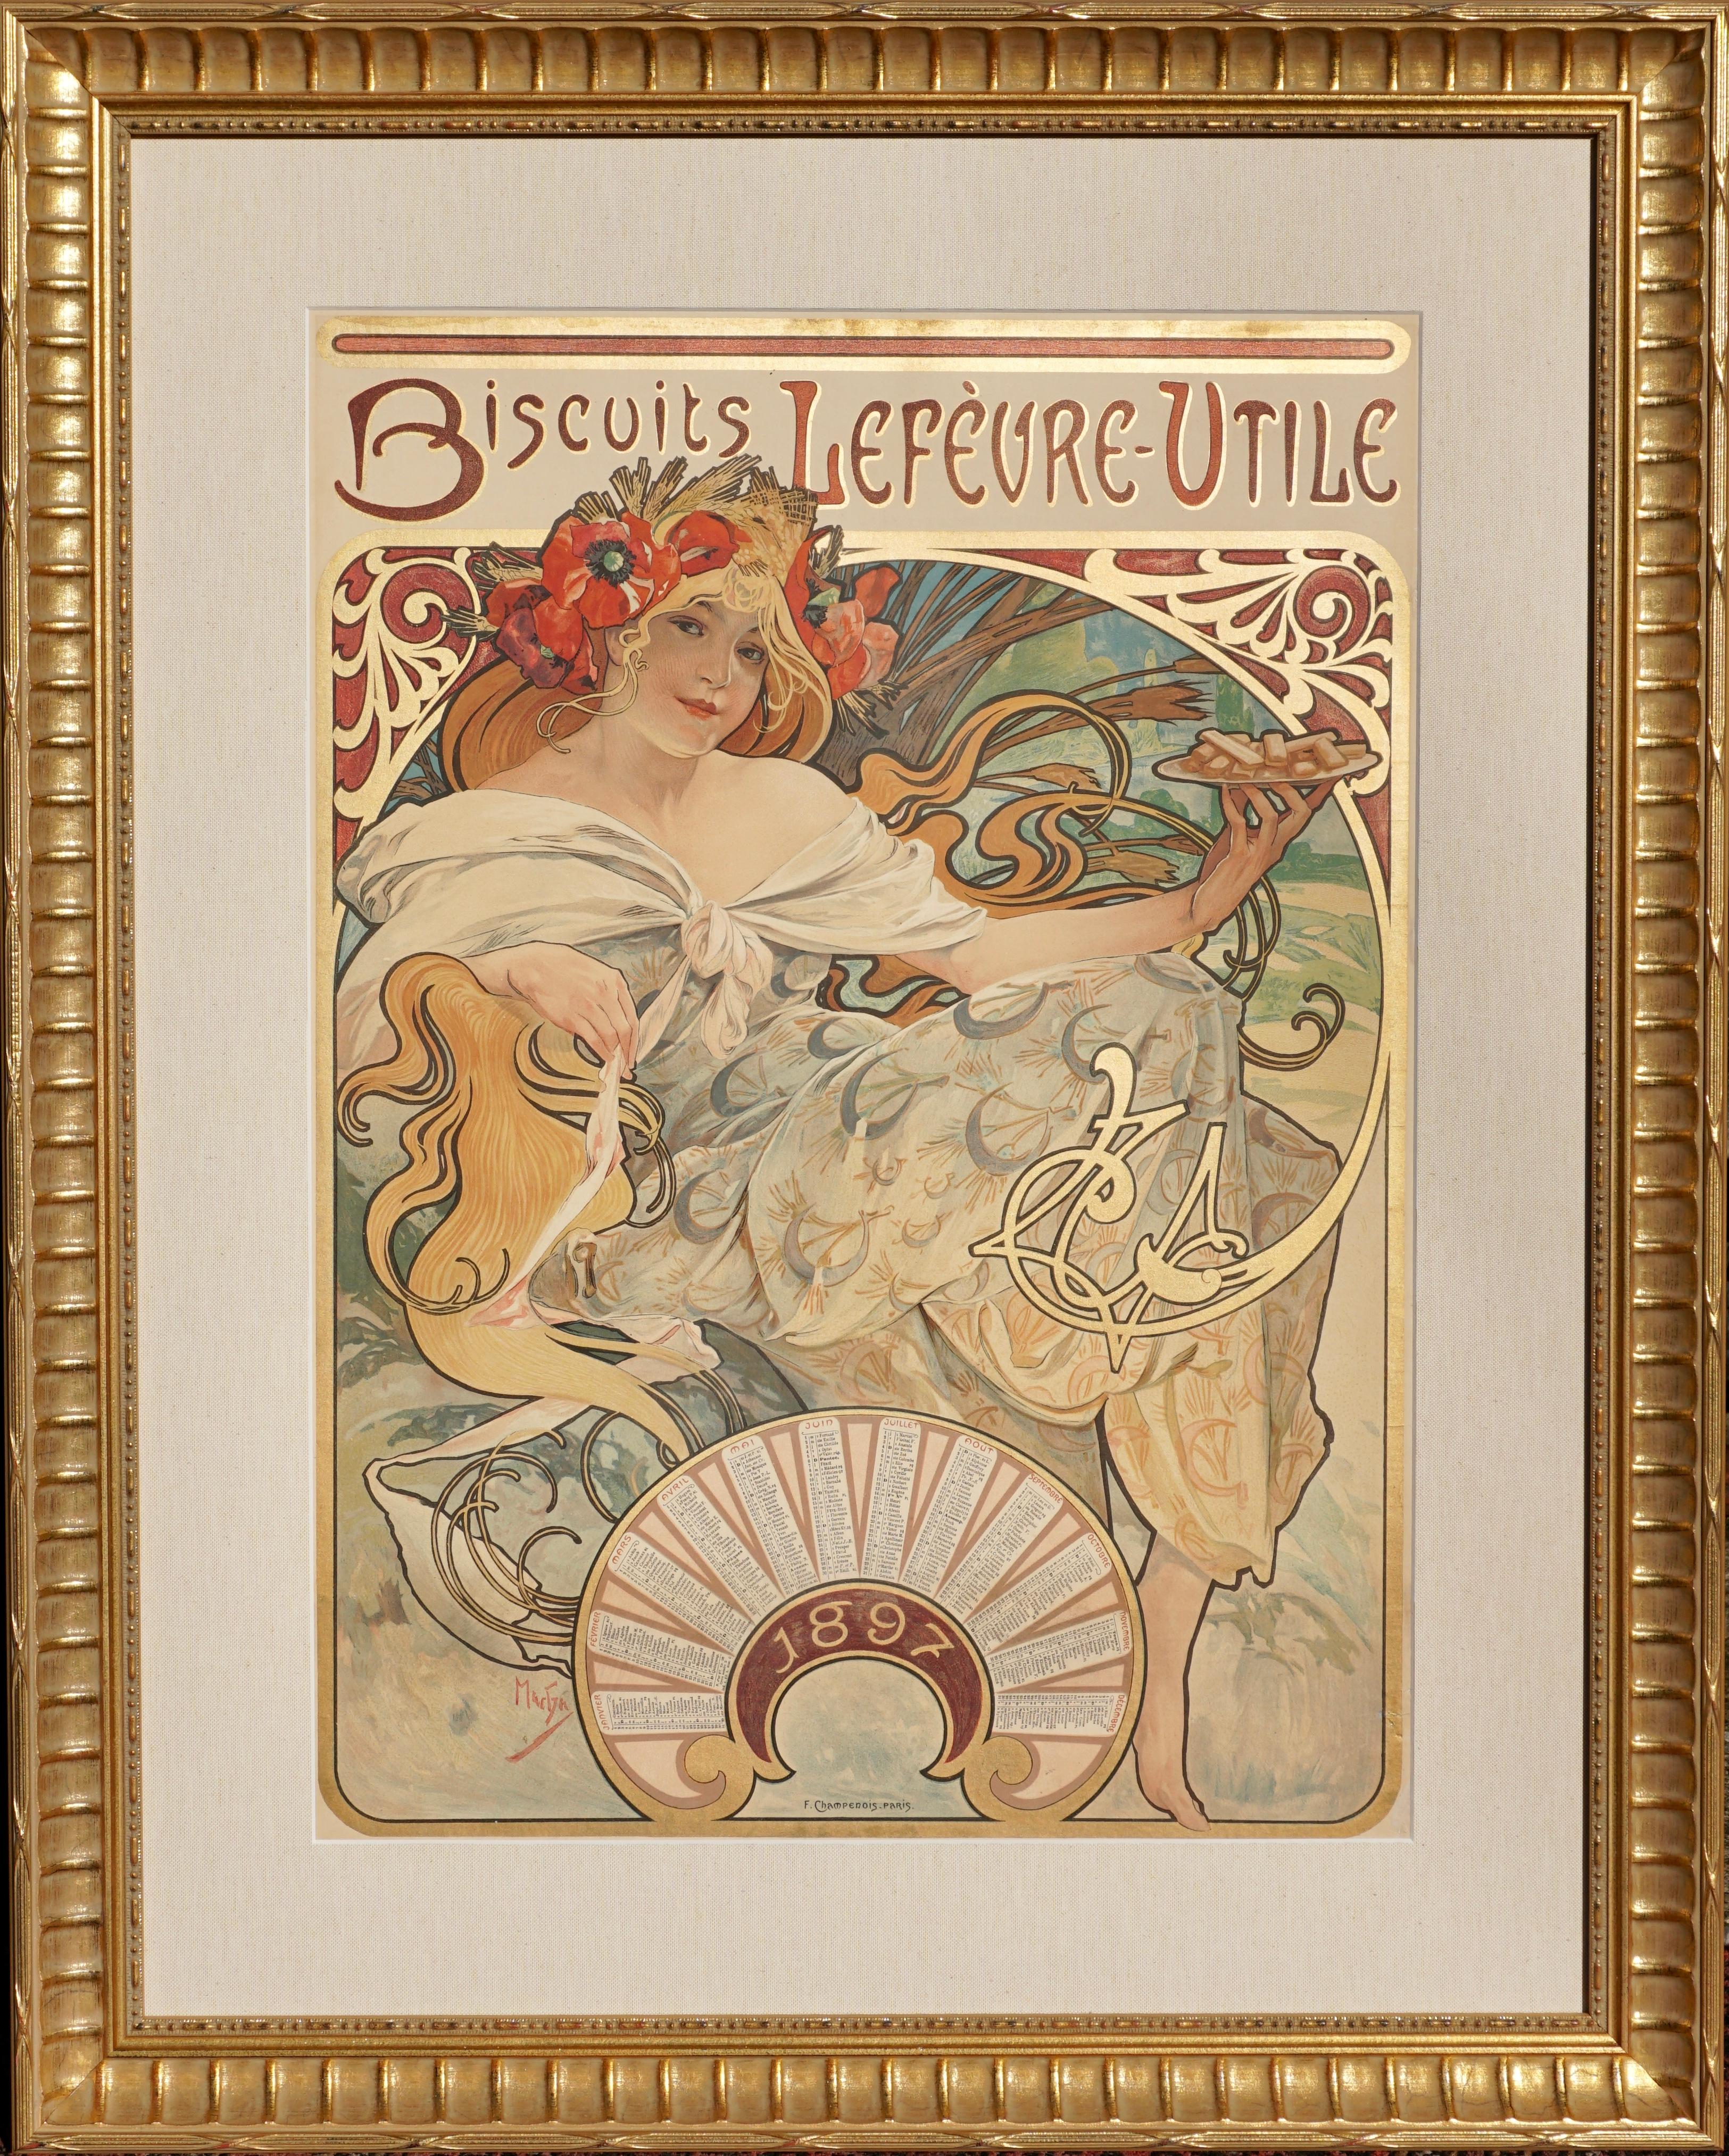 Late 19th Century Alphonse Mucha Biscuits Lefeure Utile Poster, 1897